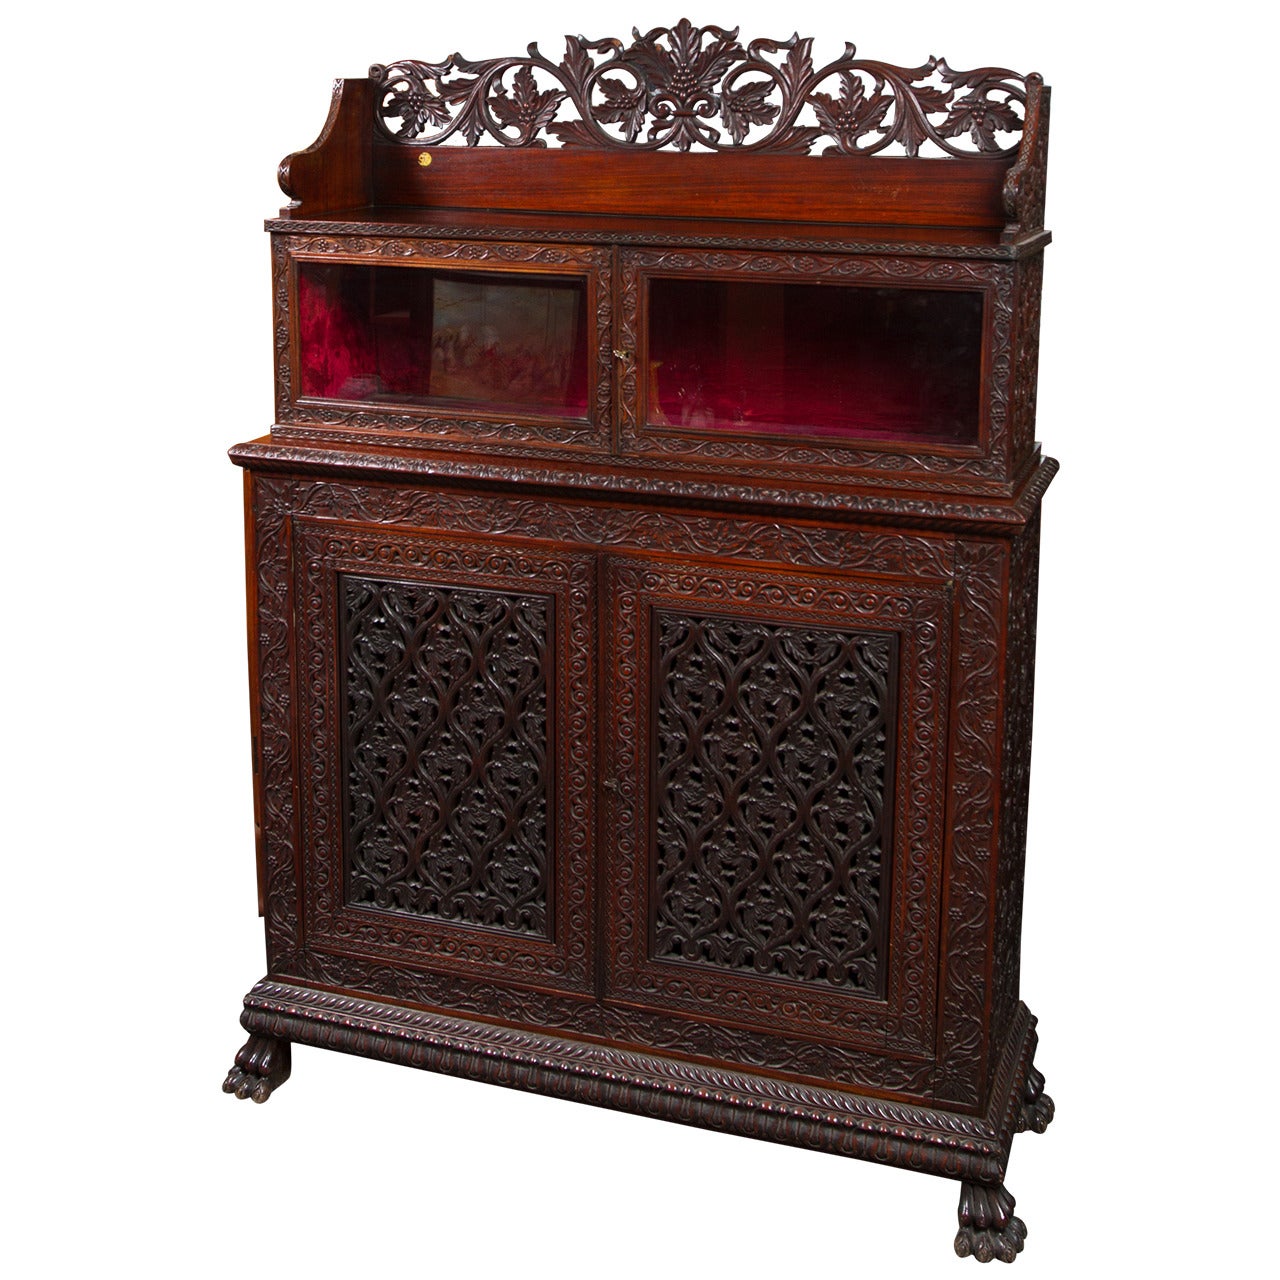 Fine William IV Period Anglo-Indian Walnut Cabinet